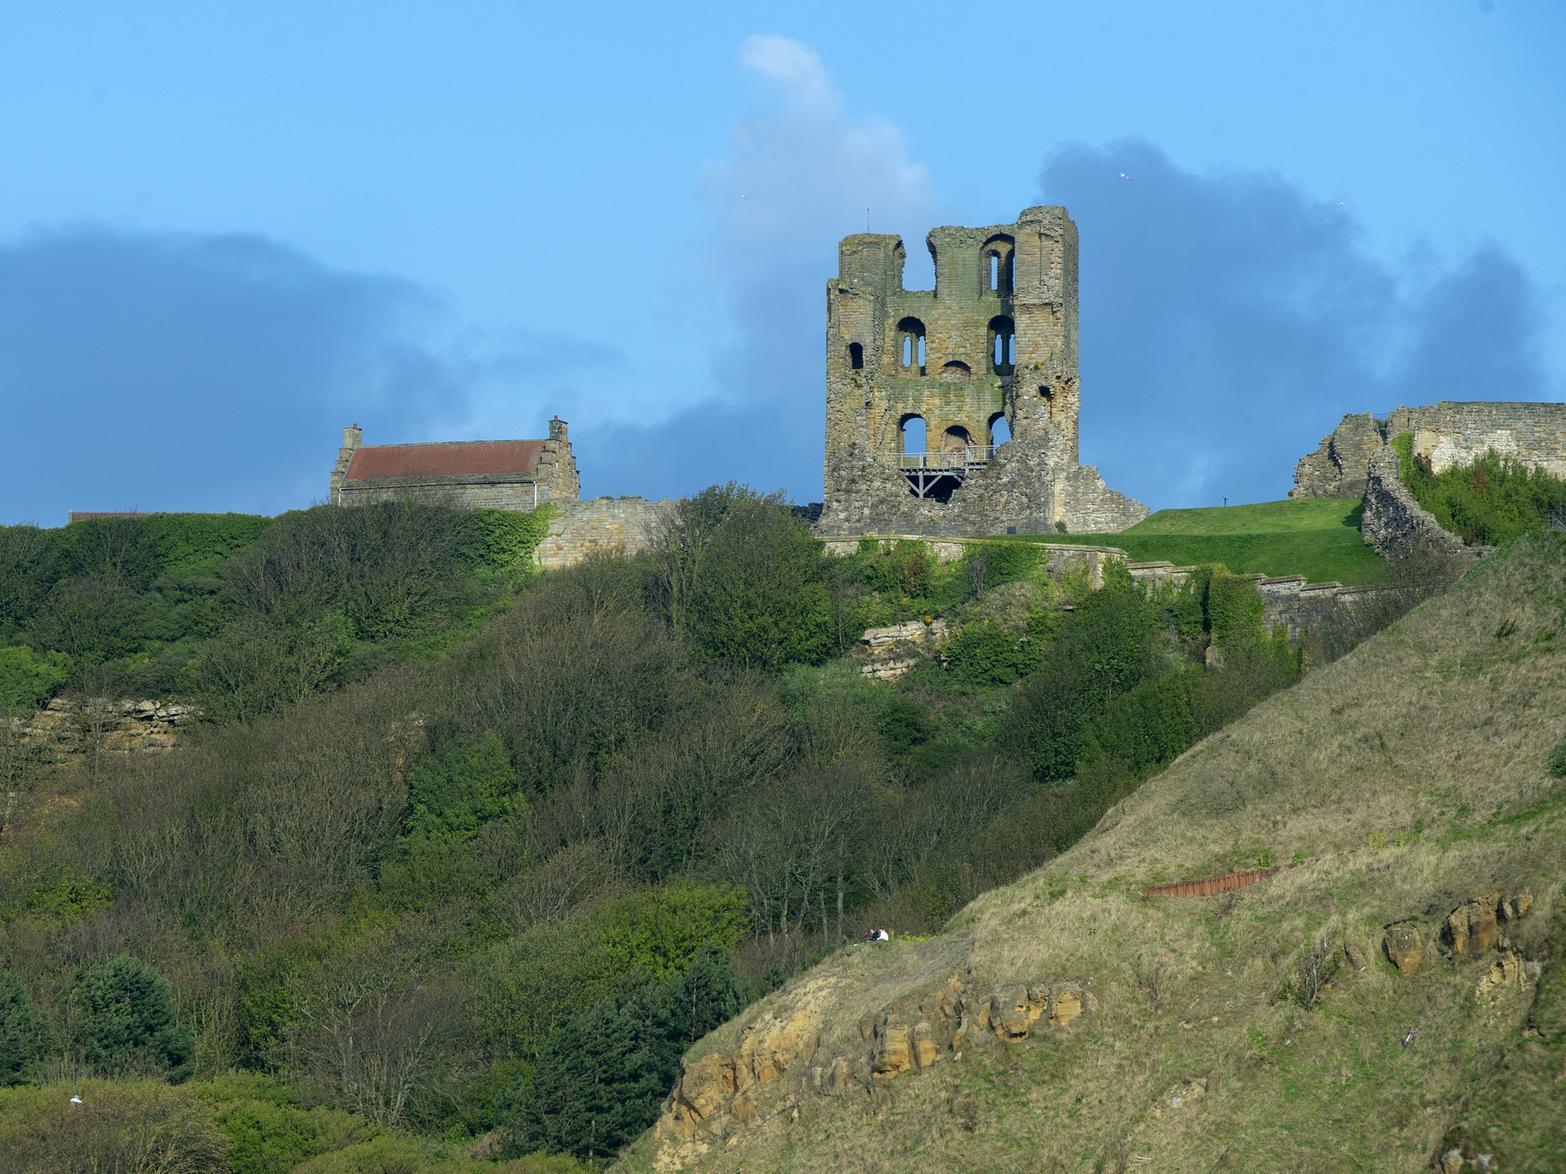 If history and great views are the interests of your partner, Scarborough Castle has them both on offer and would make a great place for a proposal.